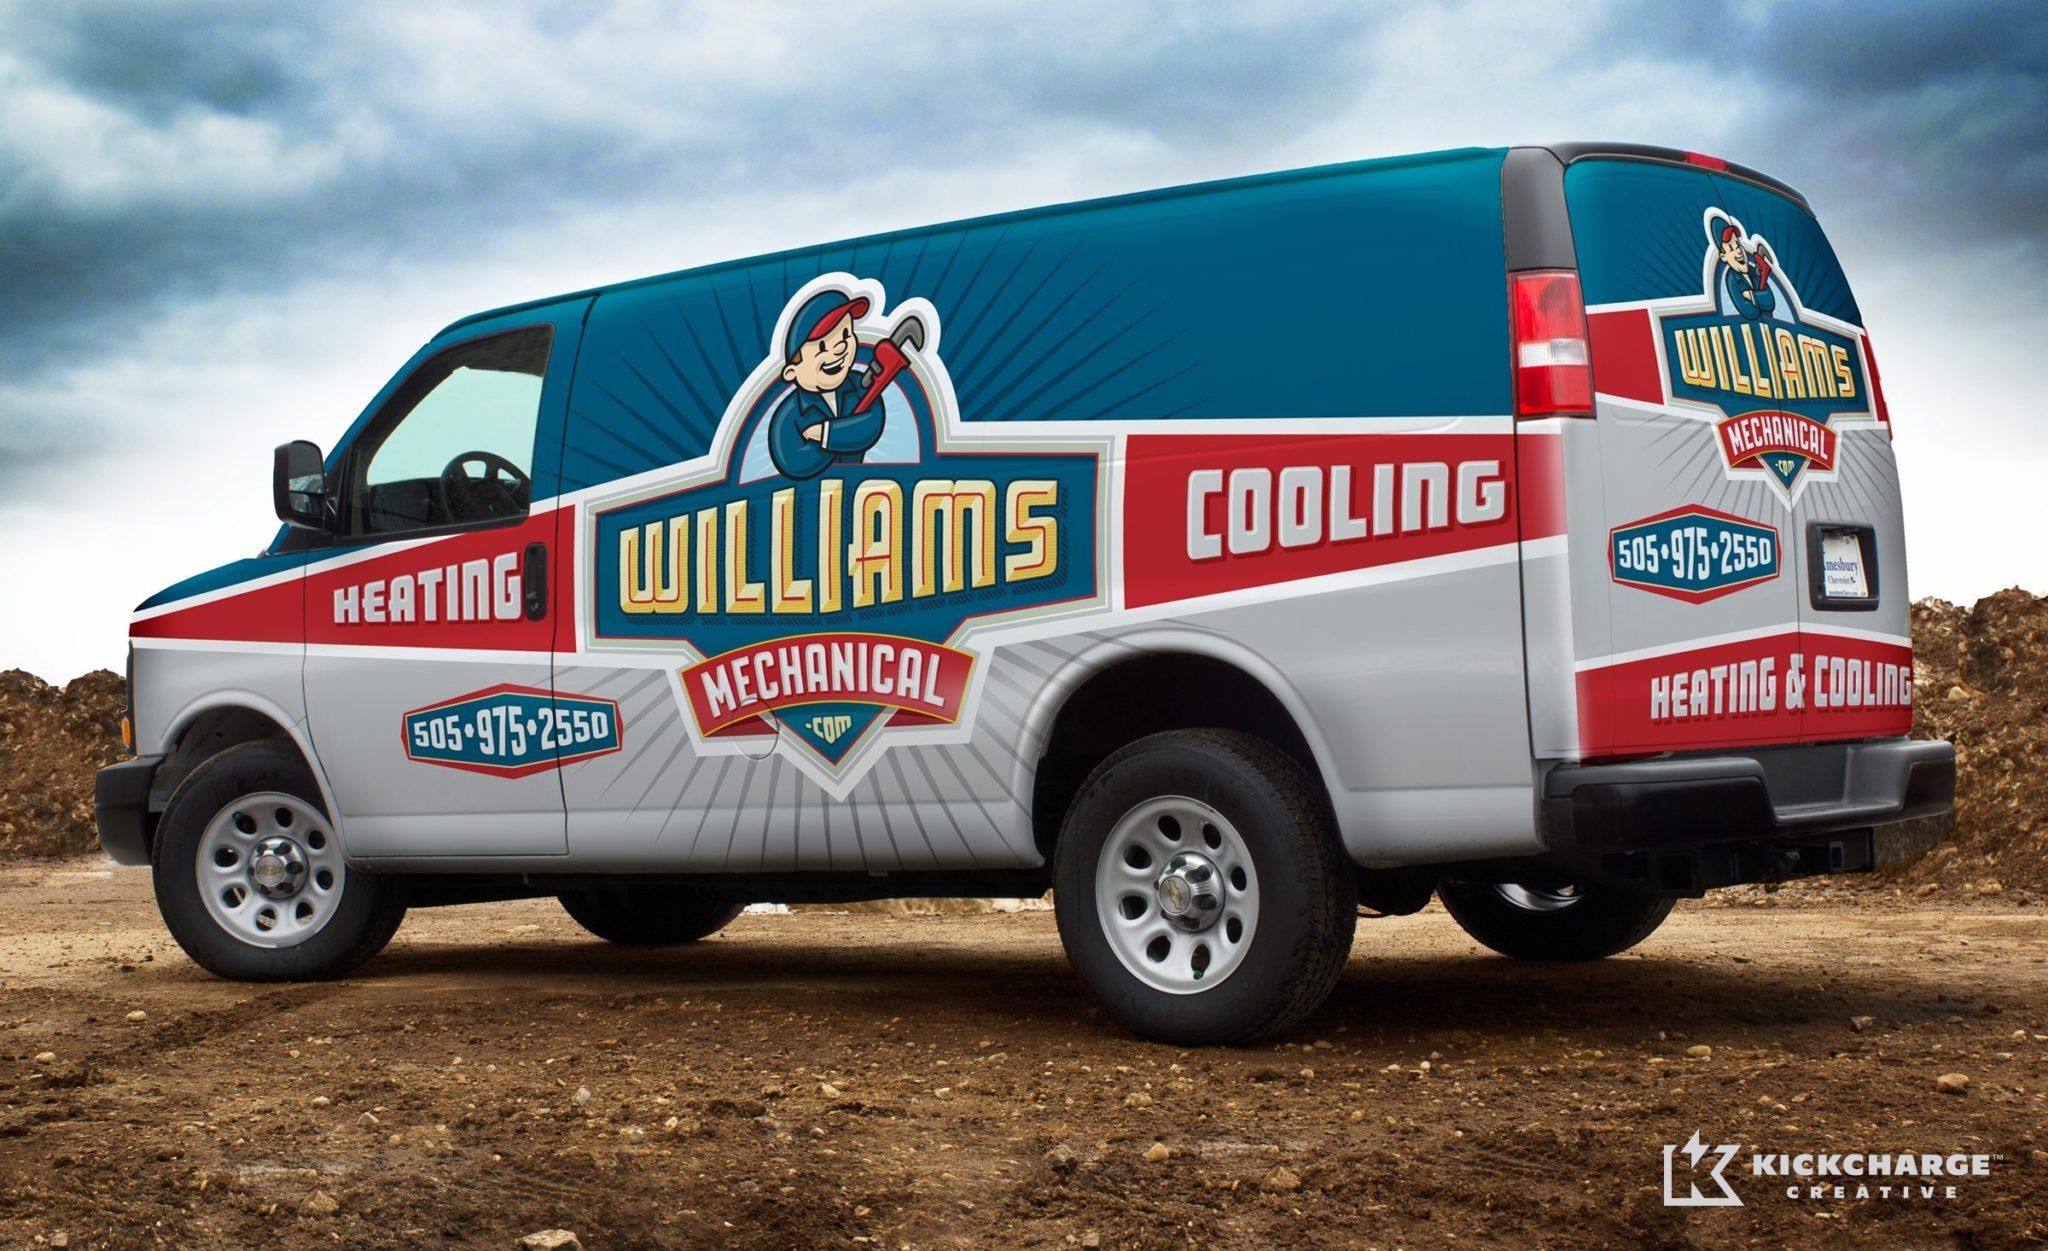 Fleet wrap design for an HVAC company in New Mexico.